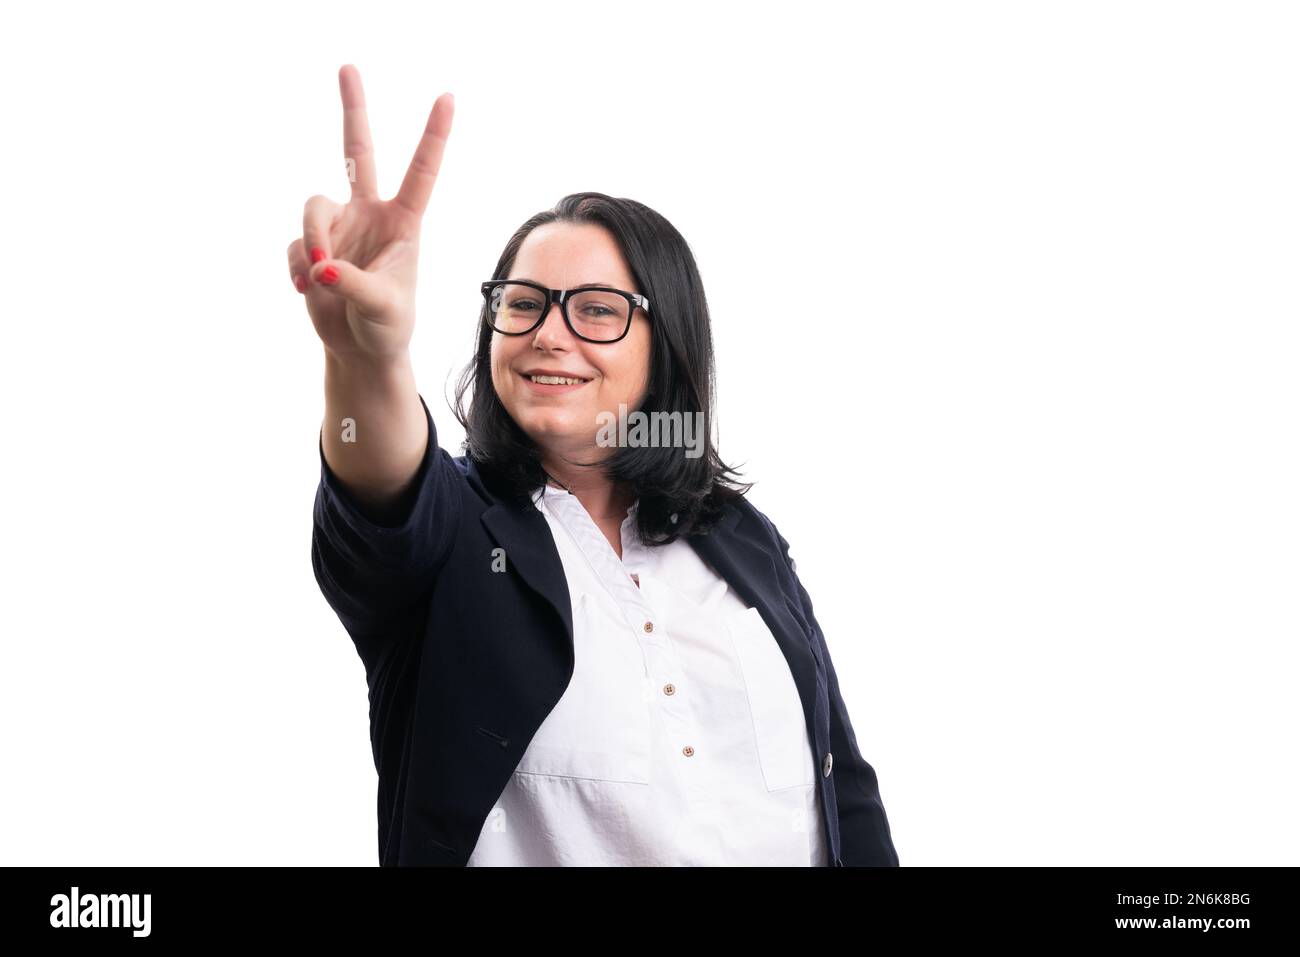 Smiling female model entrepreneur businesswoman making peace or victory sign with fingers isolated on white background blank copyspace for advertising Stock Photo